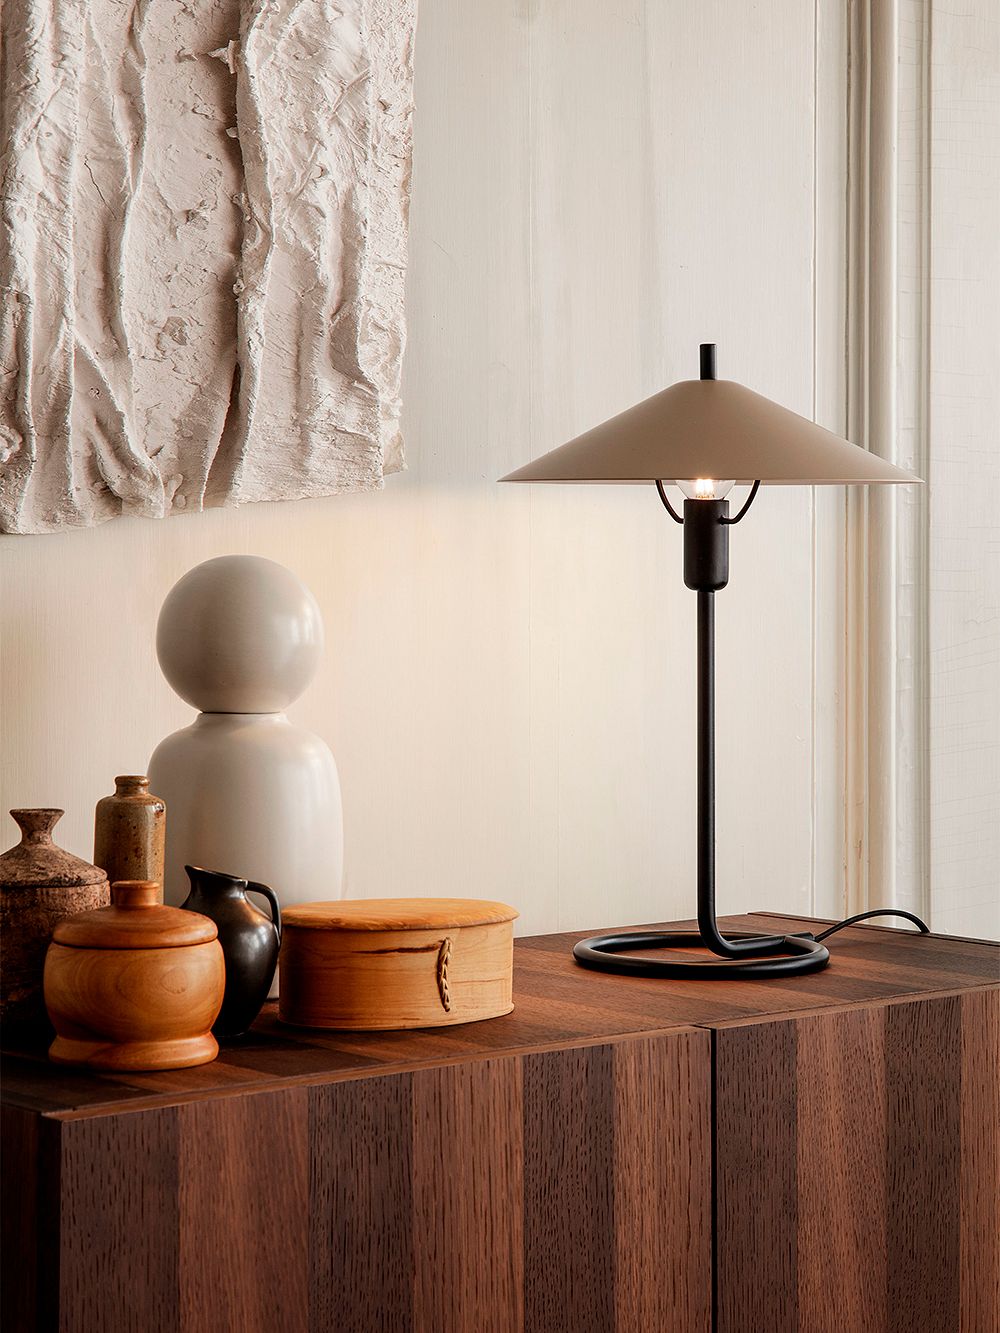 An image of ferm LIVING's Filo table lamp as part of the living room decor.